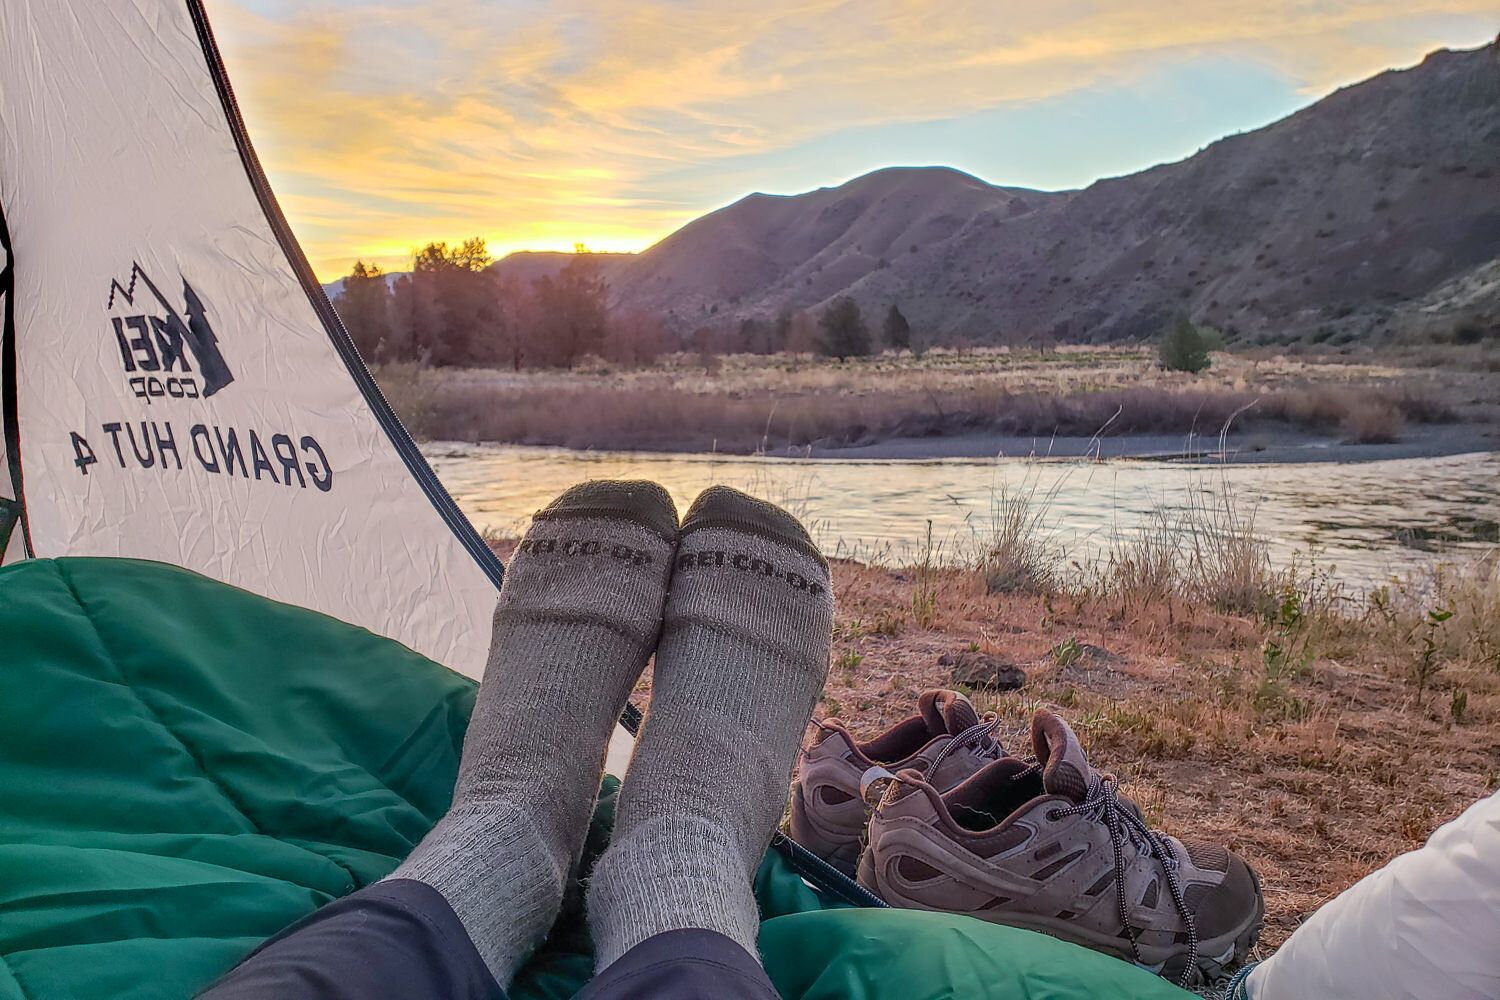 Photo of a person in a tent with their feet in socks. Socks are framed in the open tent door in front of a beautiful lake/mountain sunset